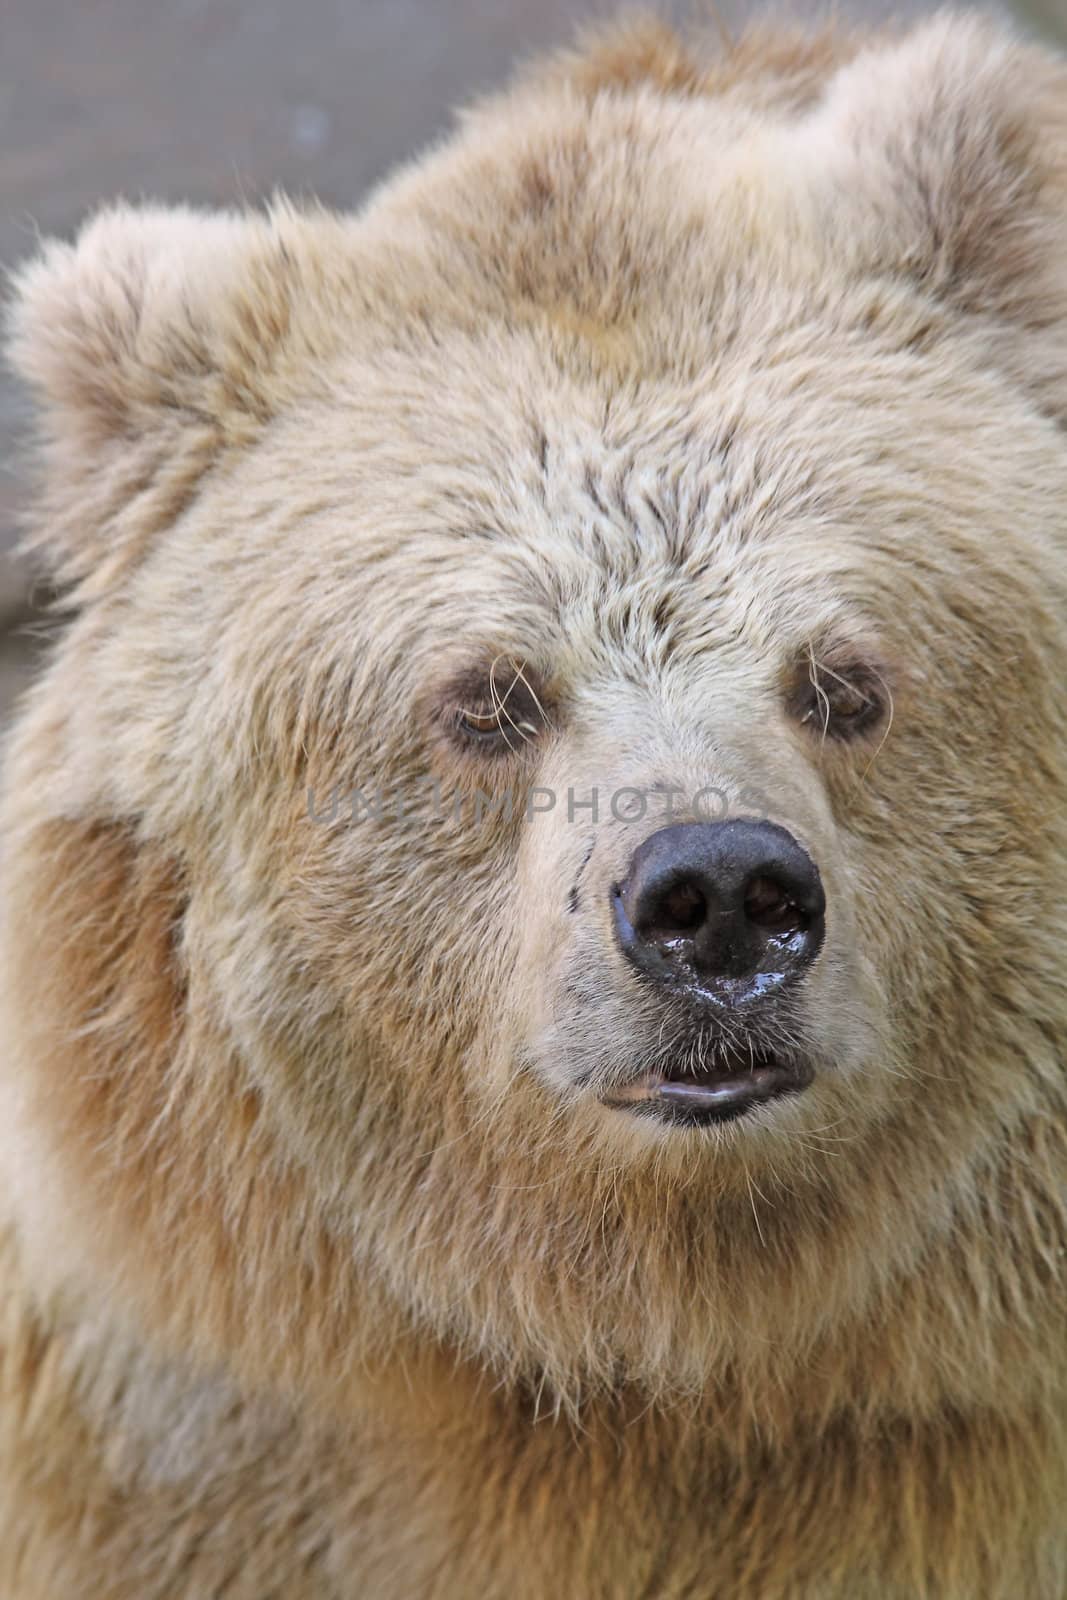 Close up of the wild bear.